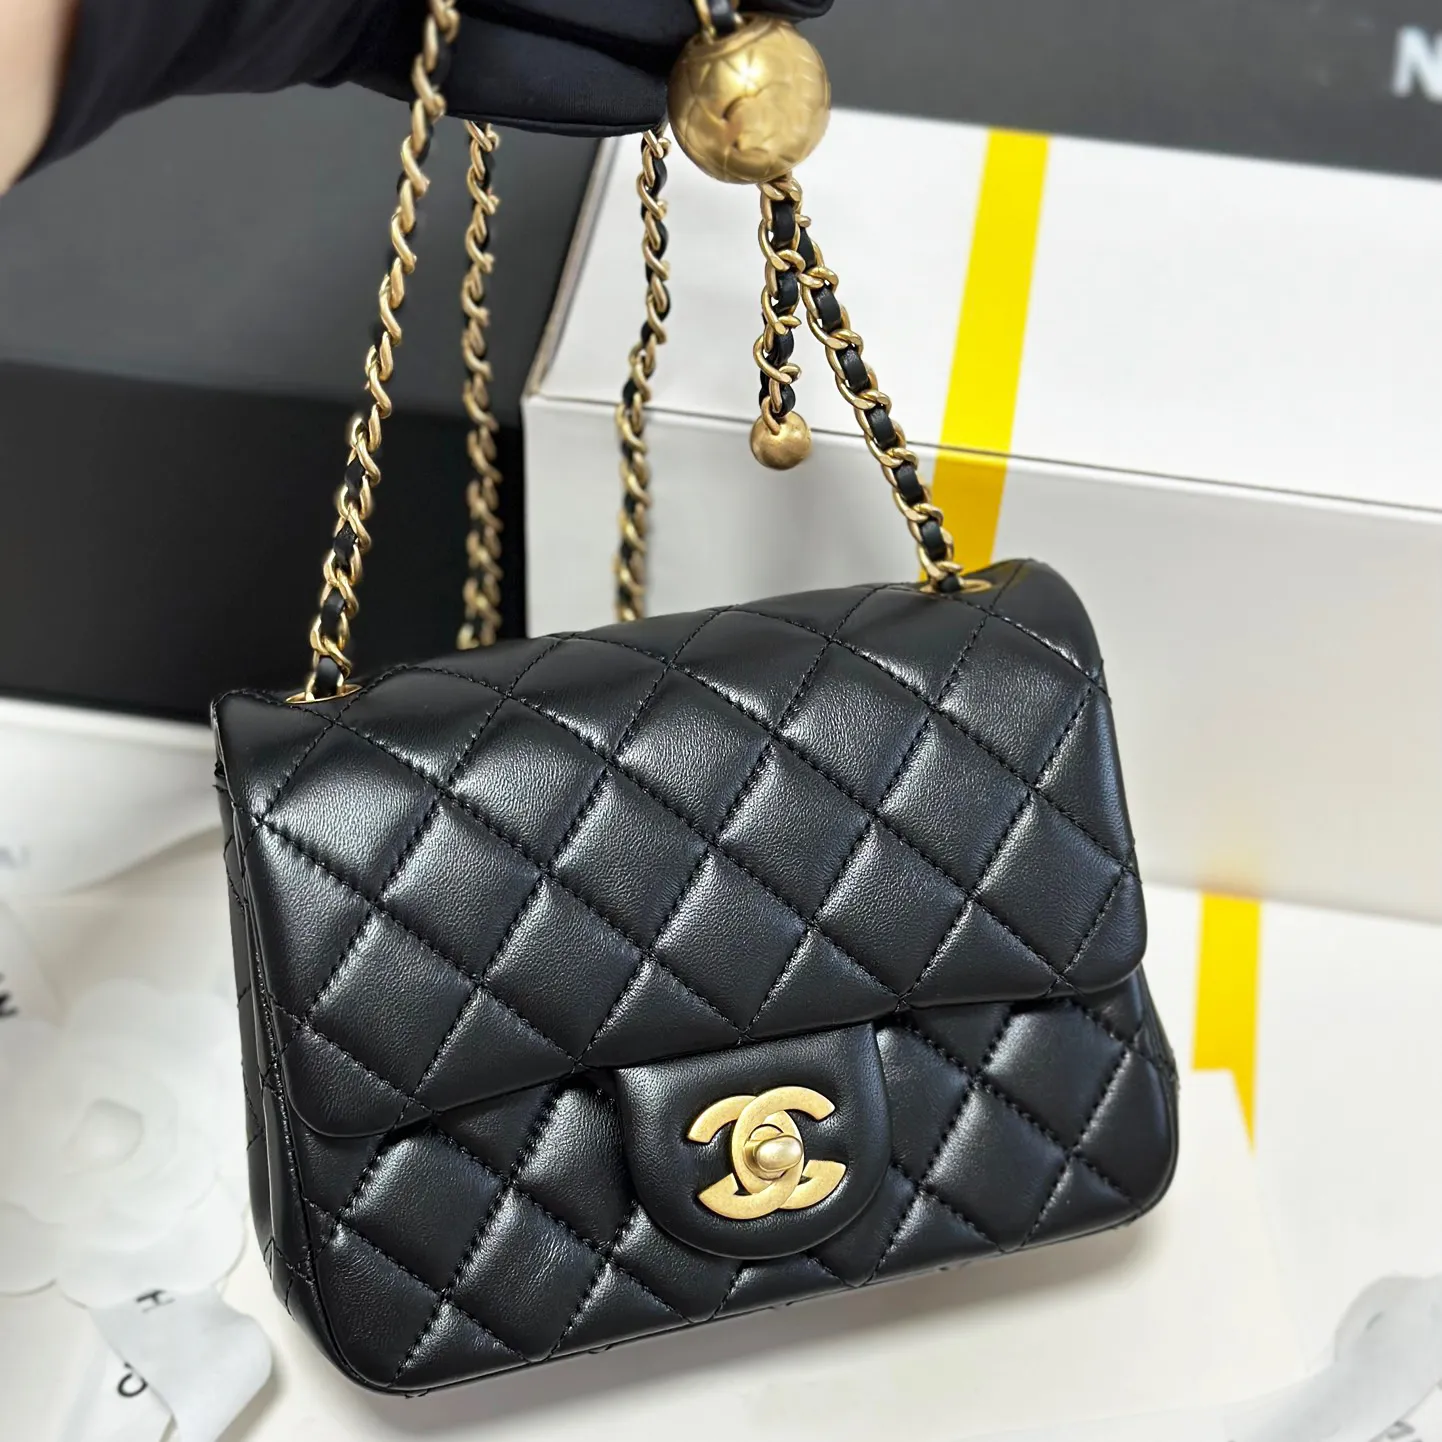 Designer bag Shoulder bag 5A high-quality black classic Luxury bag small square bag leather material diamond pattern convenient and compact 01